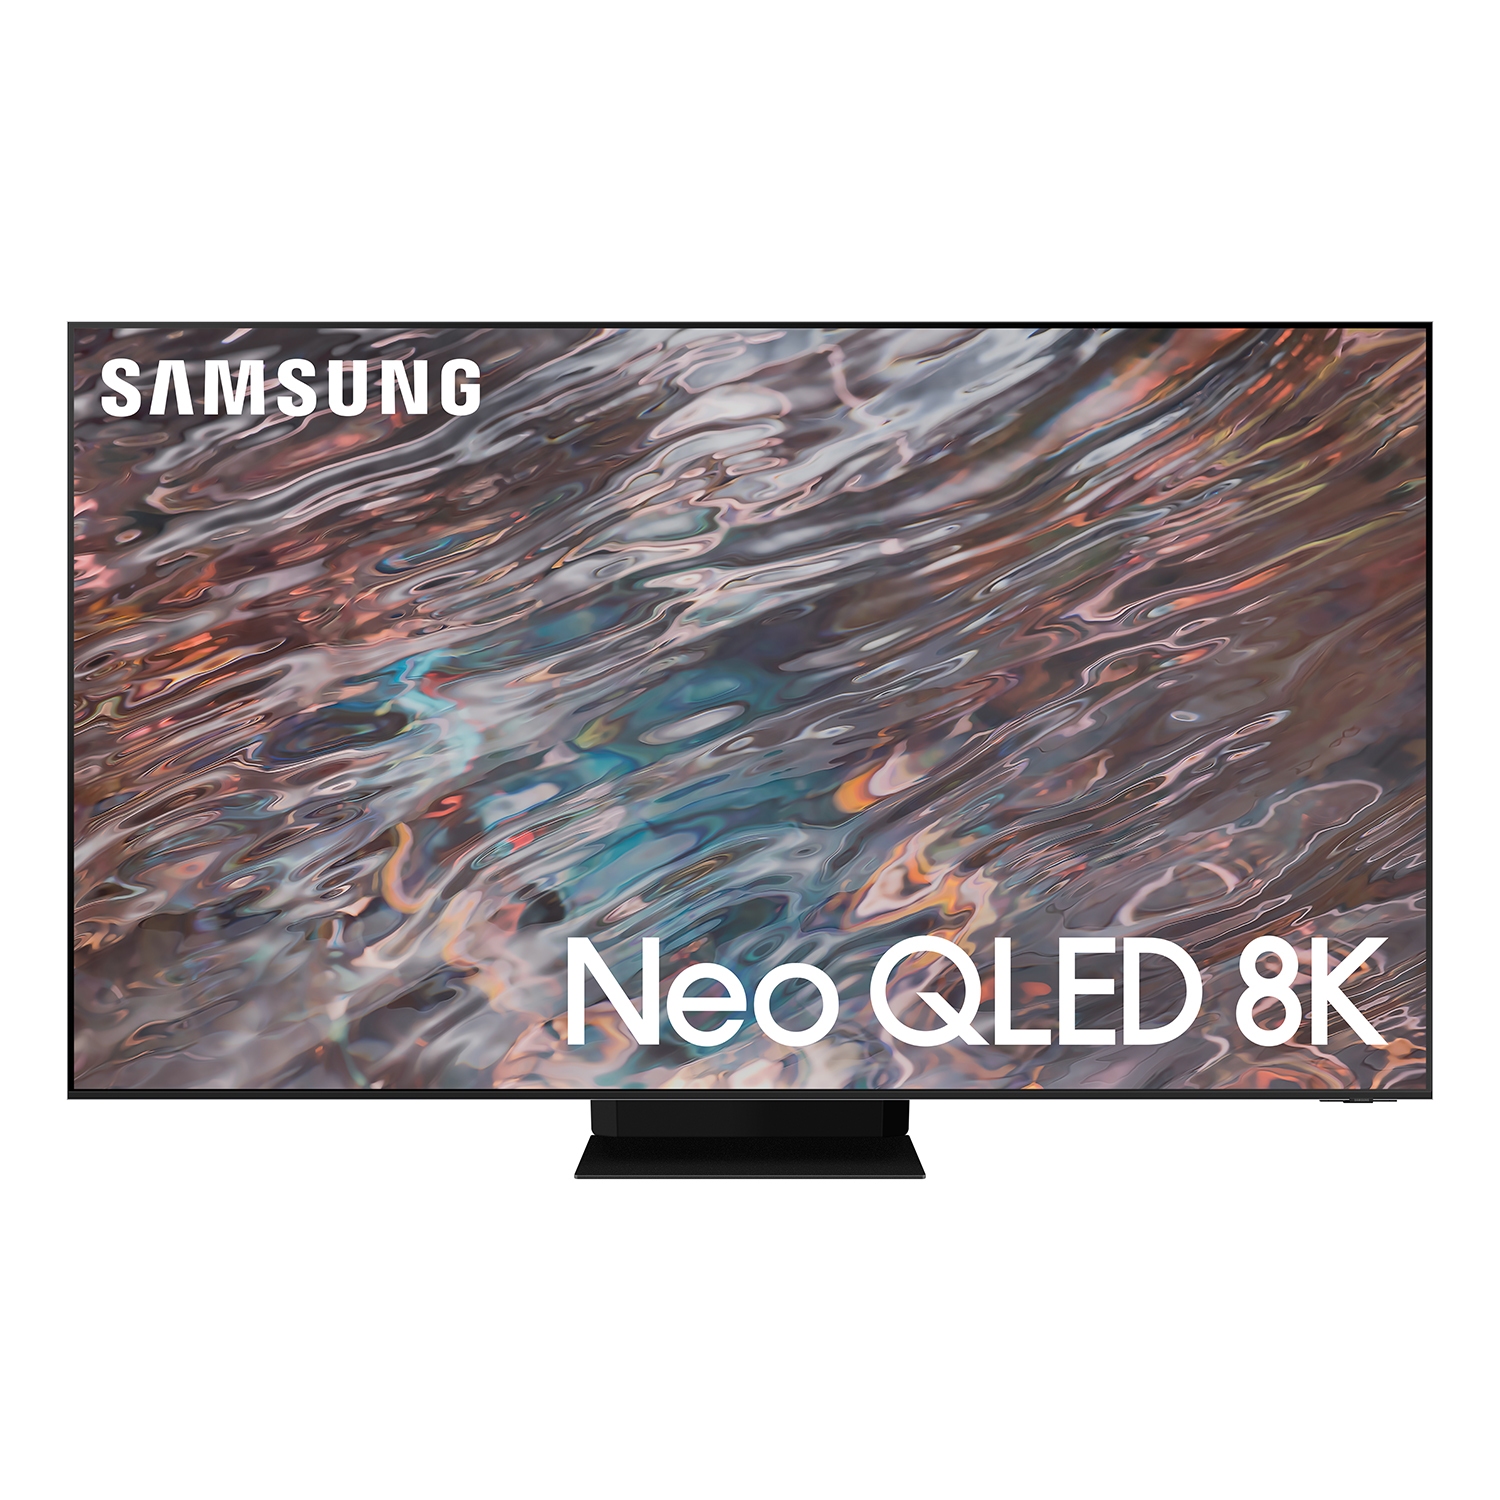 Samsung QE85QN800ATXXU 85" 8K Neo QLED Smart TV Quantum HDR 2000 powered by HDR10+ Ultra Viewing Angle and Anti Reflection Screen - 0